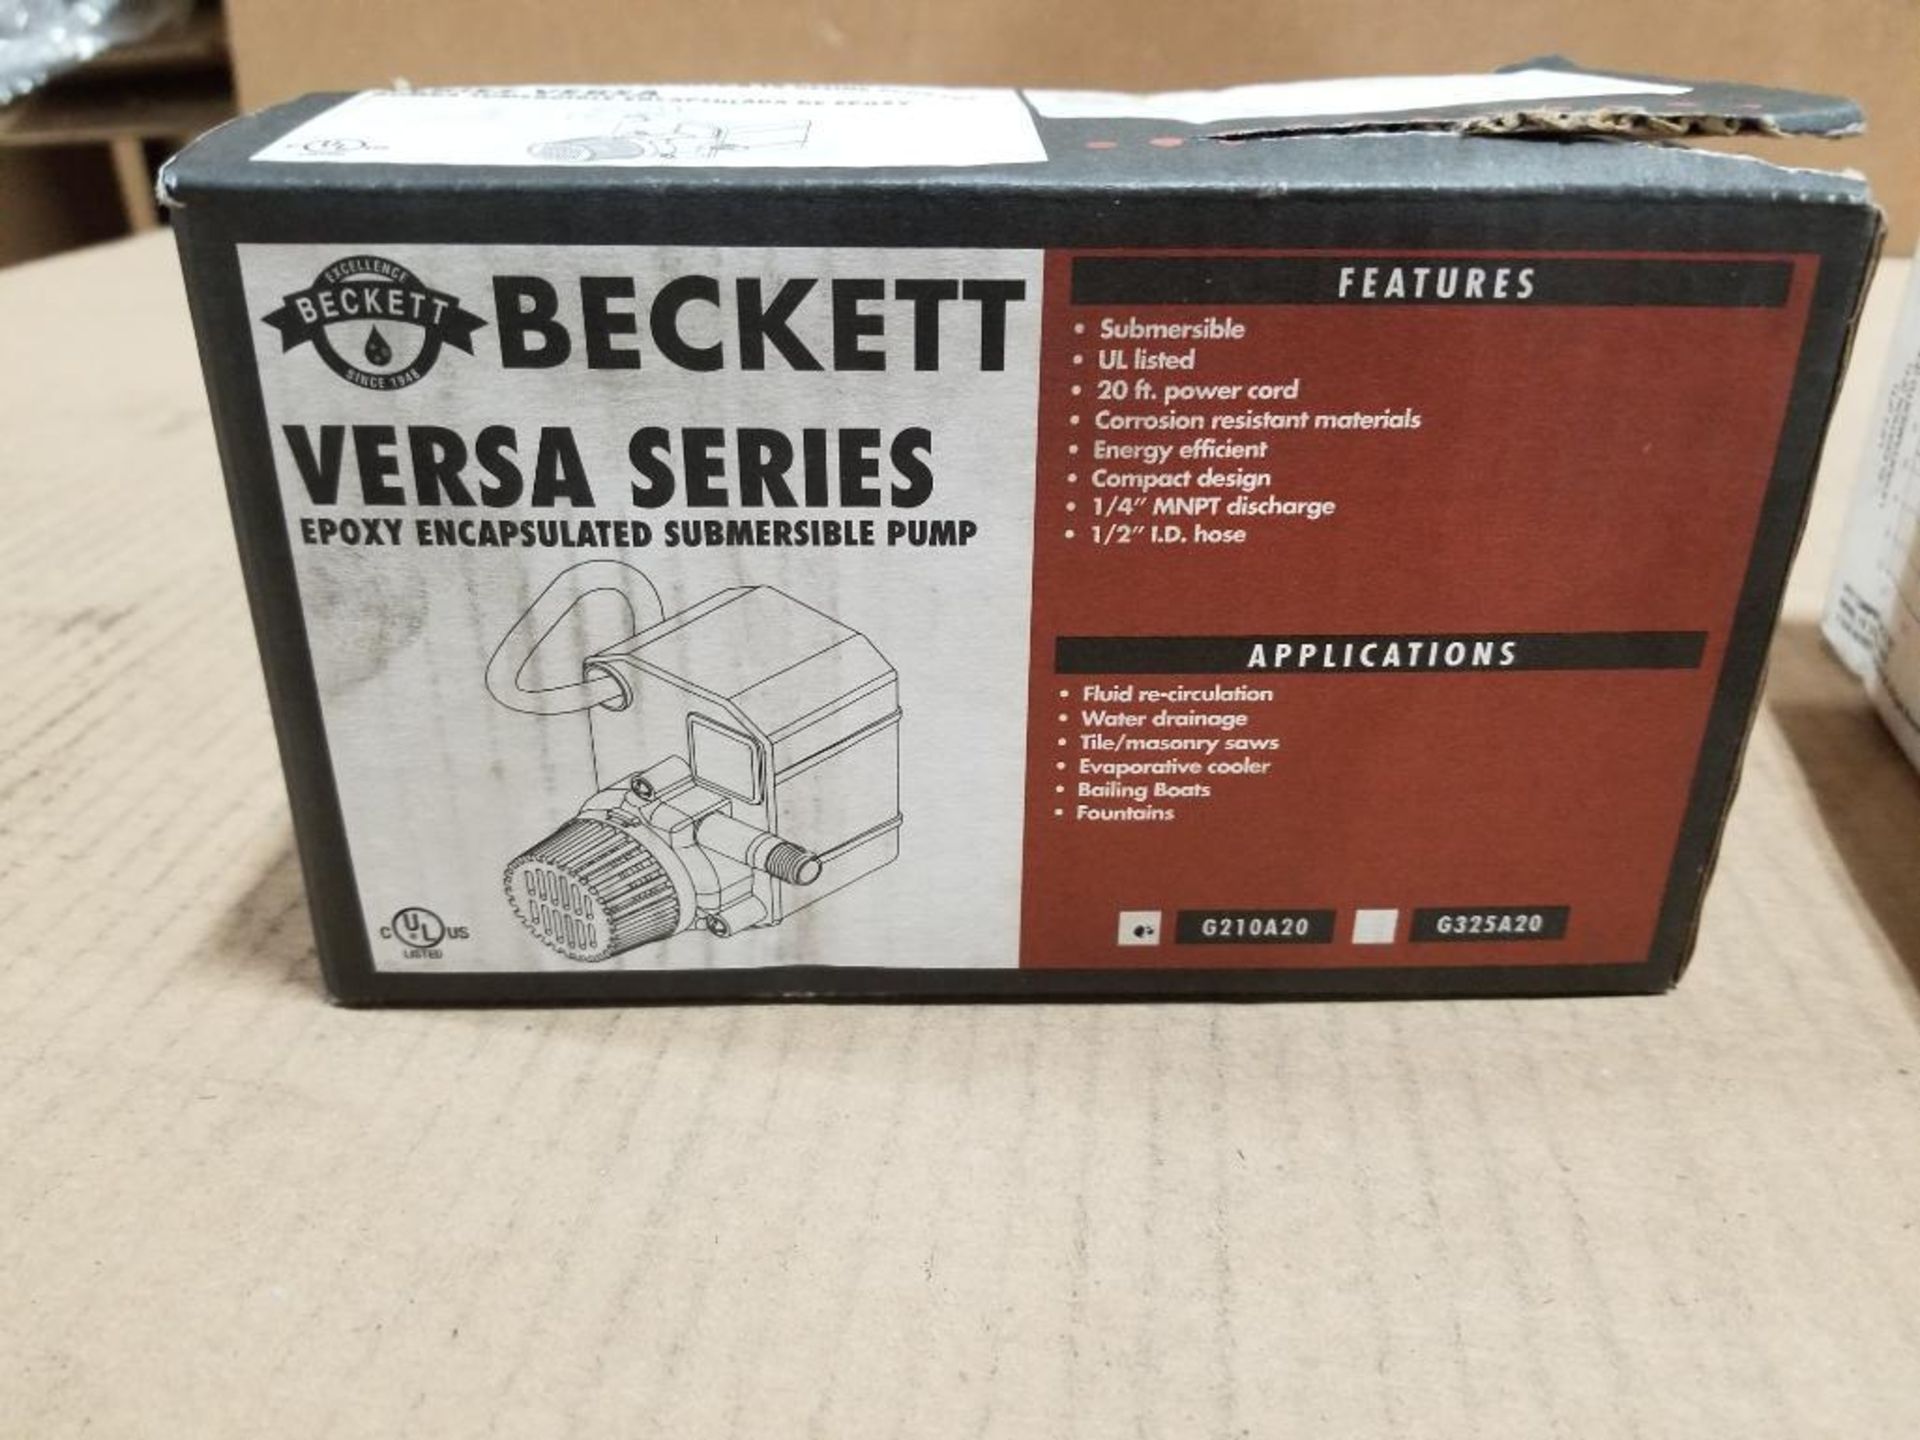 Qty 2 - Becket Versa Series submersible pump. Part number G210A20. - Image 2 of 2